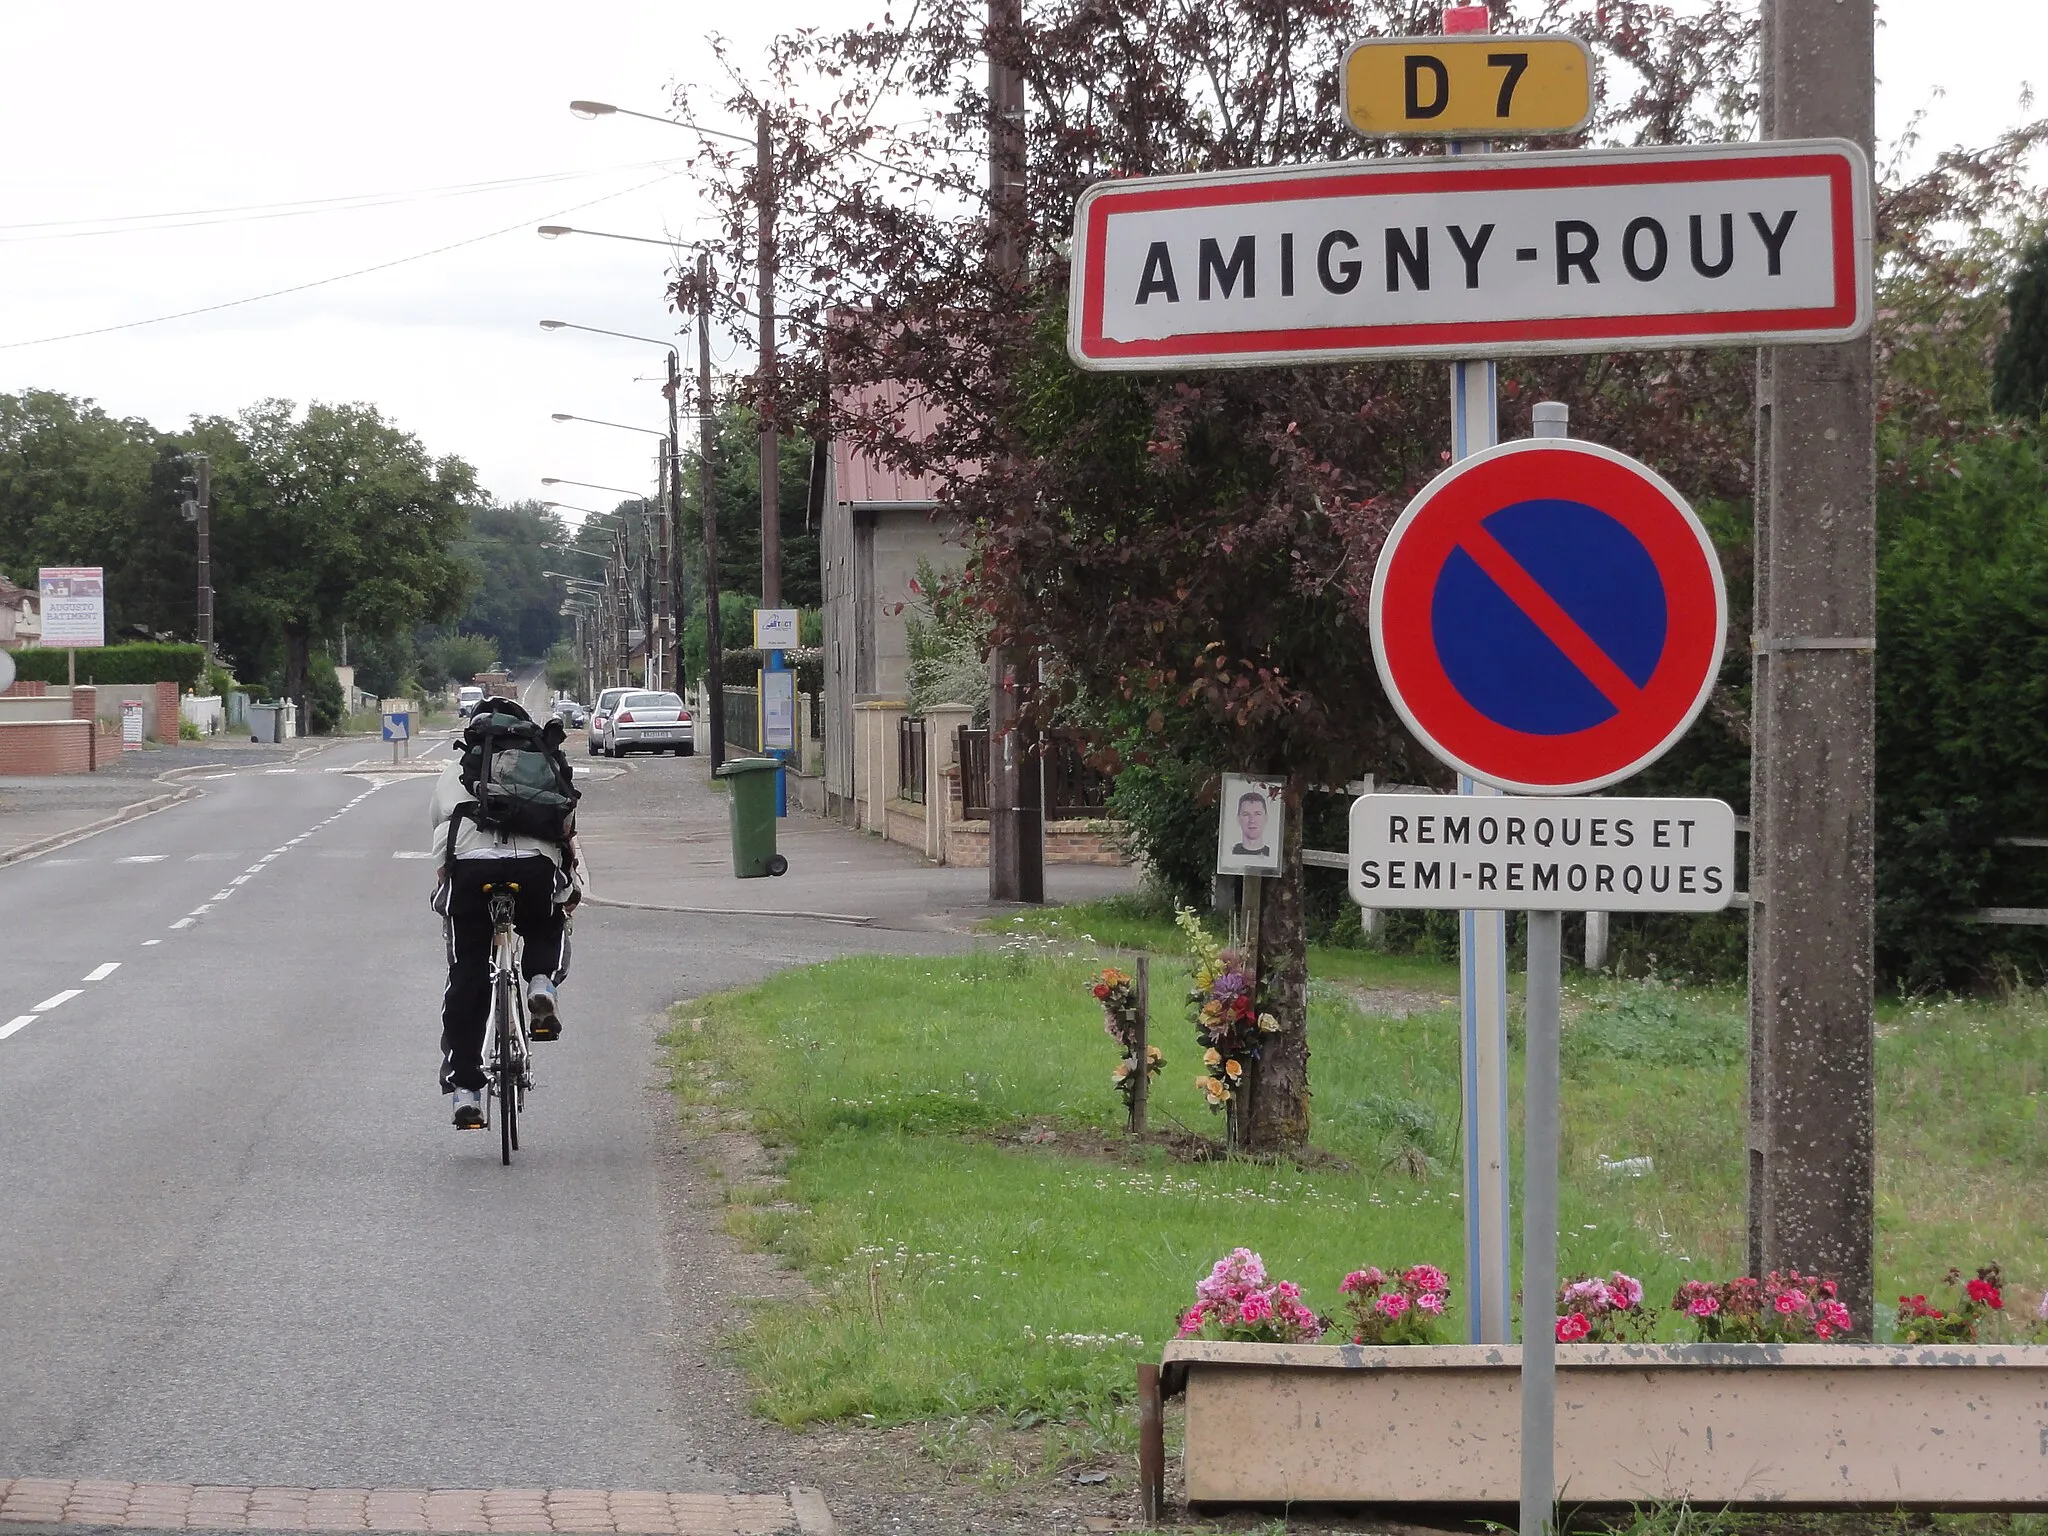 Photo showing: Amigny-Rouy (Aisne) city limit sign